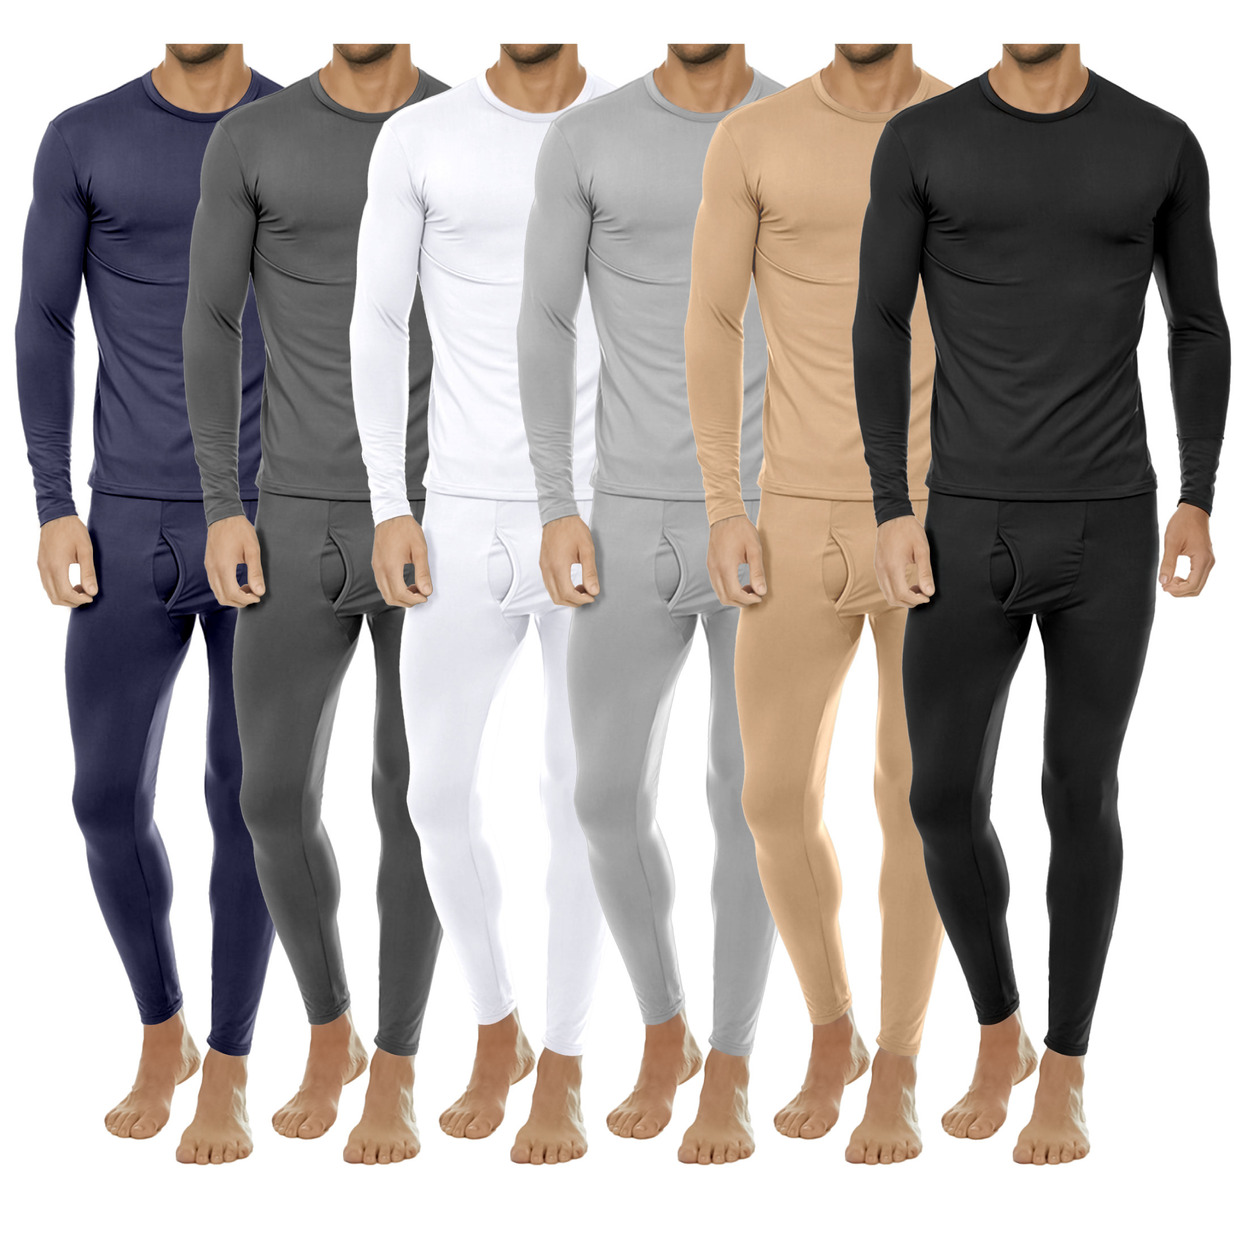 2-Pieces: Men's Winter Warm Fleece Lined Thermal Underwear Set For Cold Weather - White, Medium